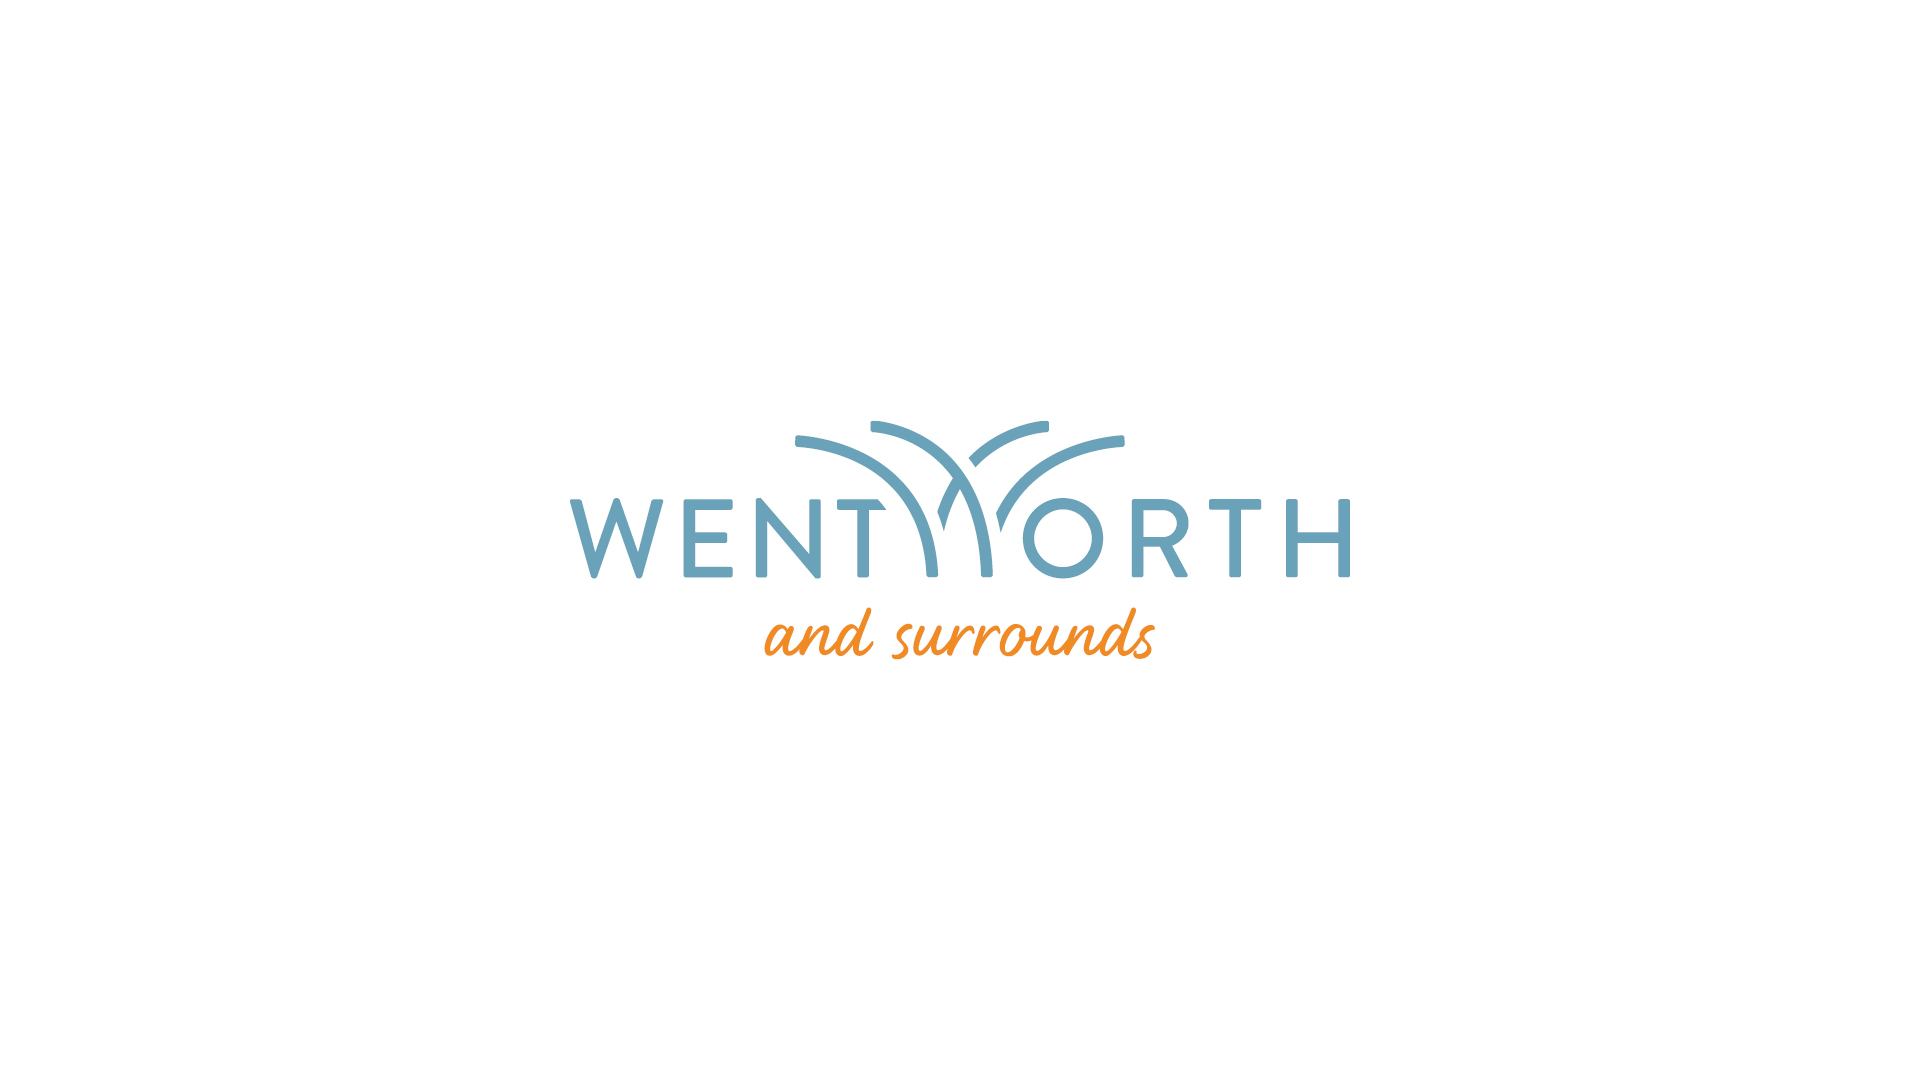 Wentworth and Surrounds Logo and Branding Design - Saunders Design Group